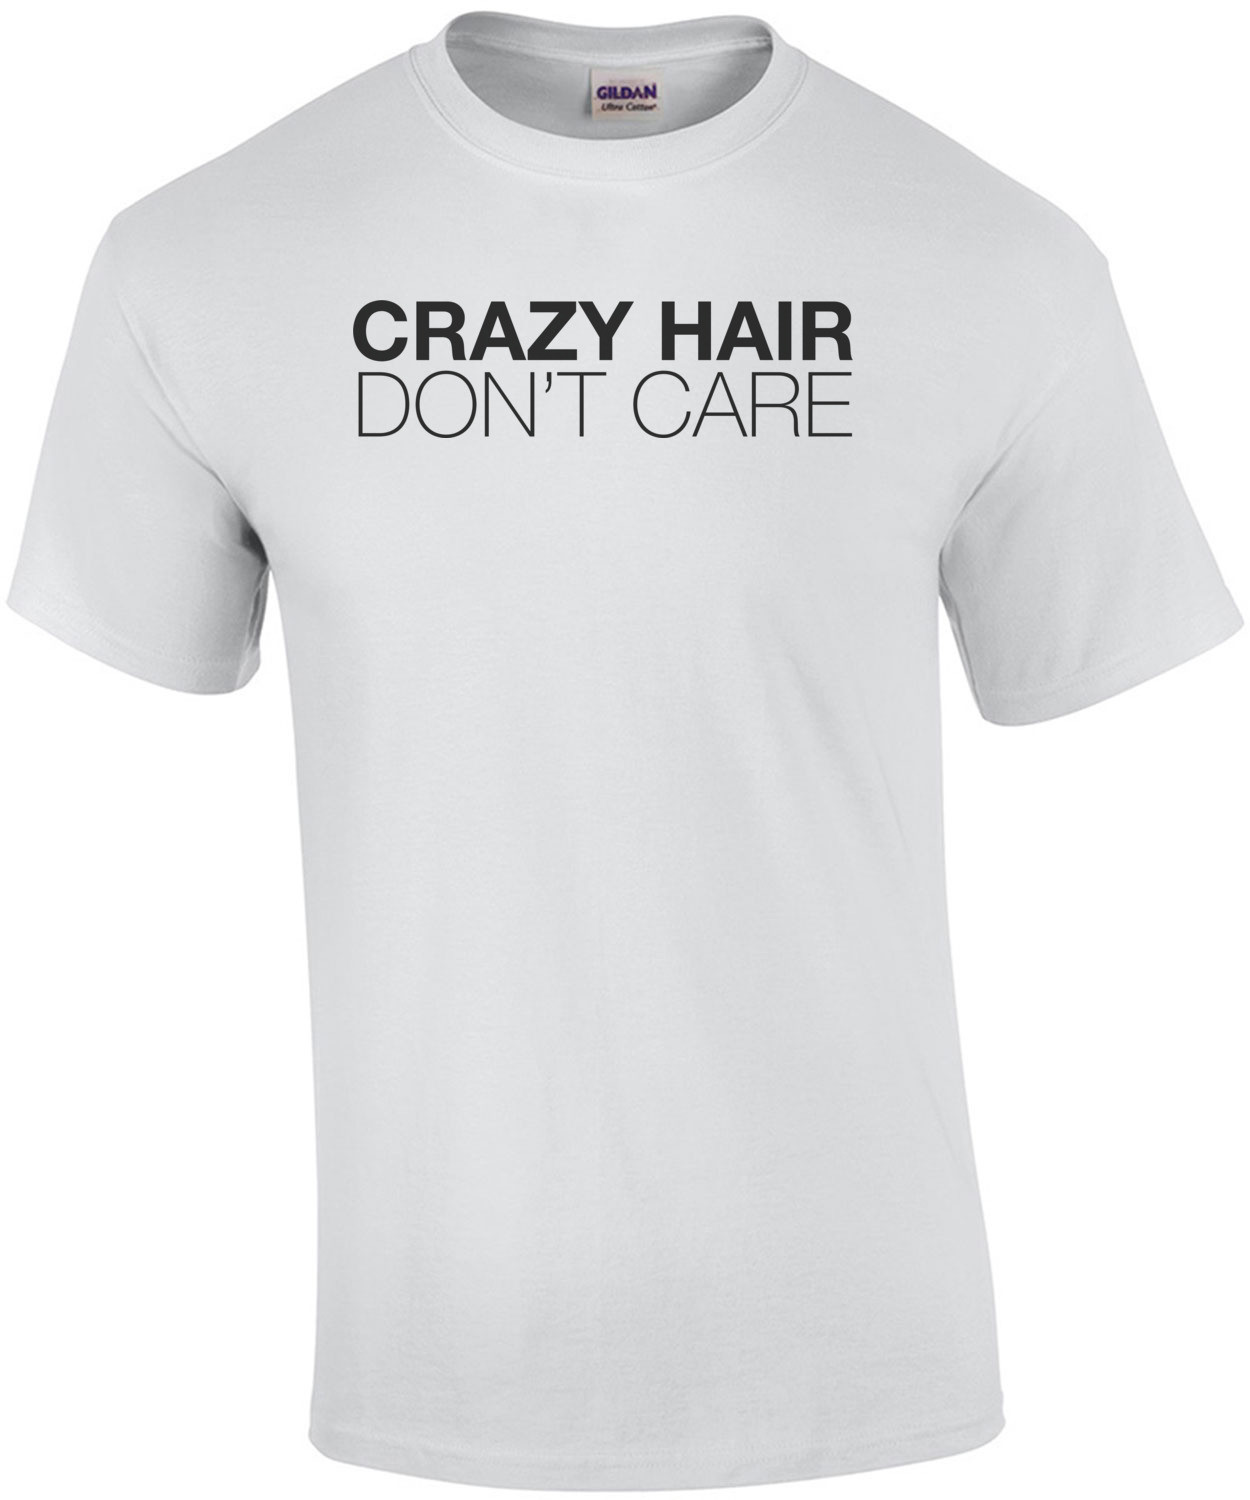 Crazy Hair Don't Care T-Shirt